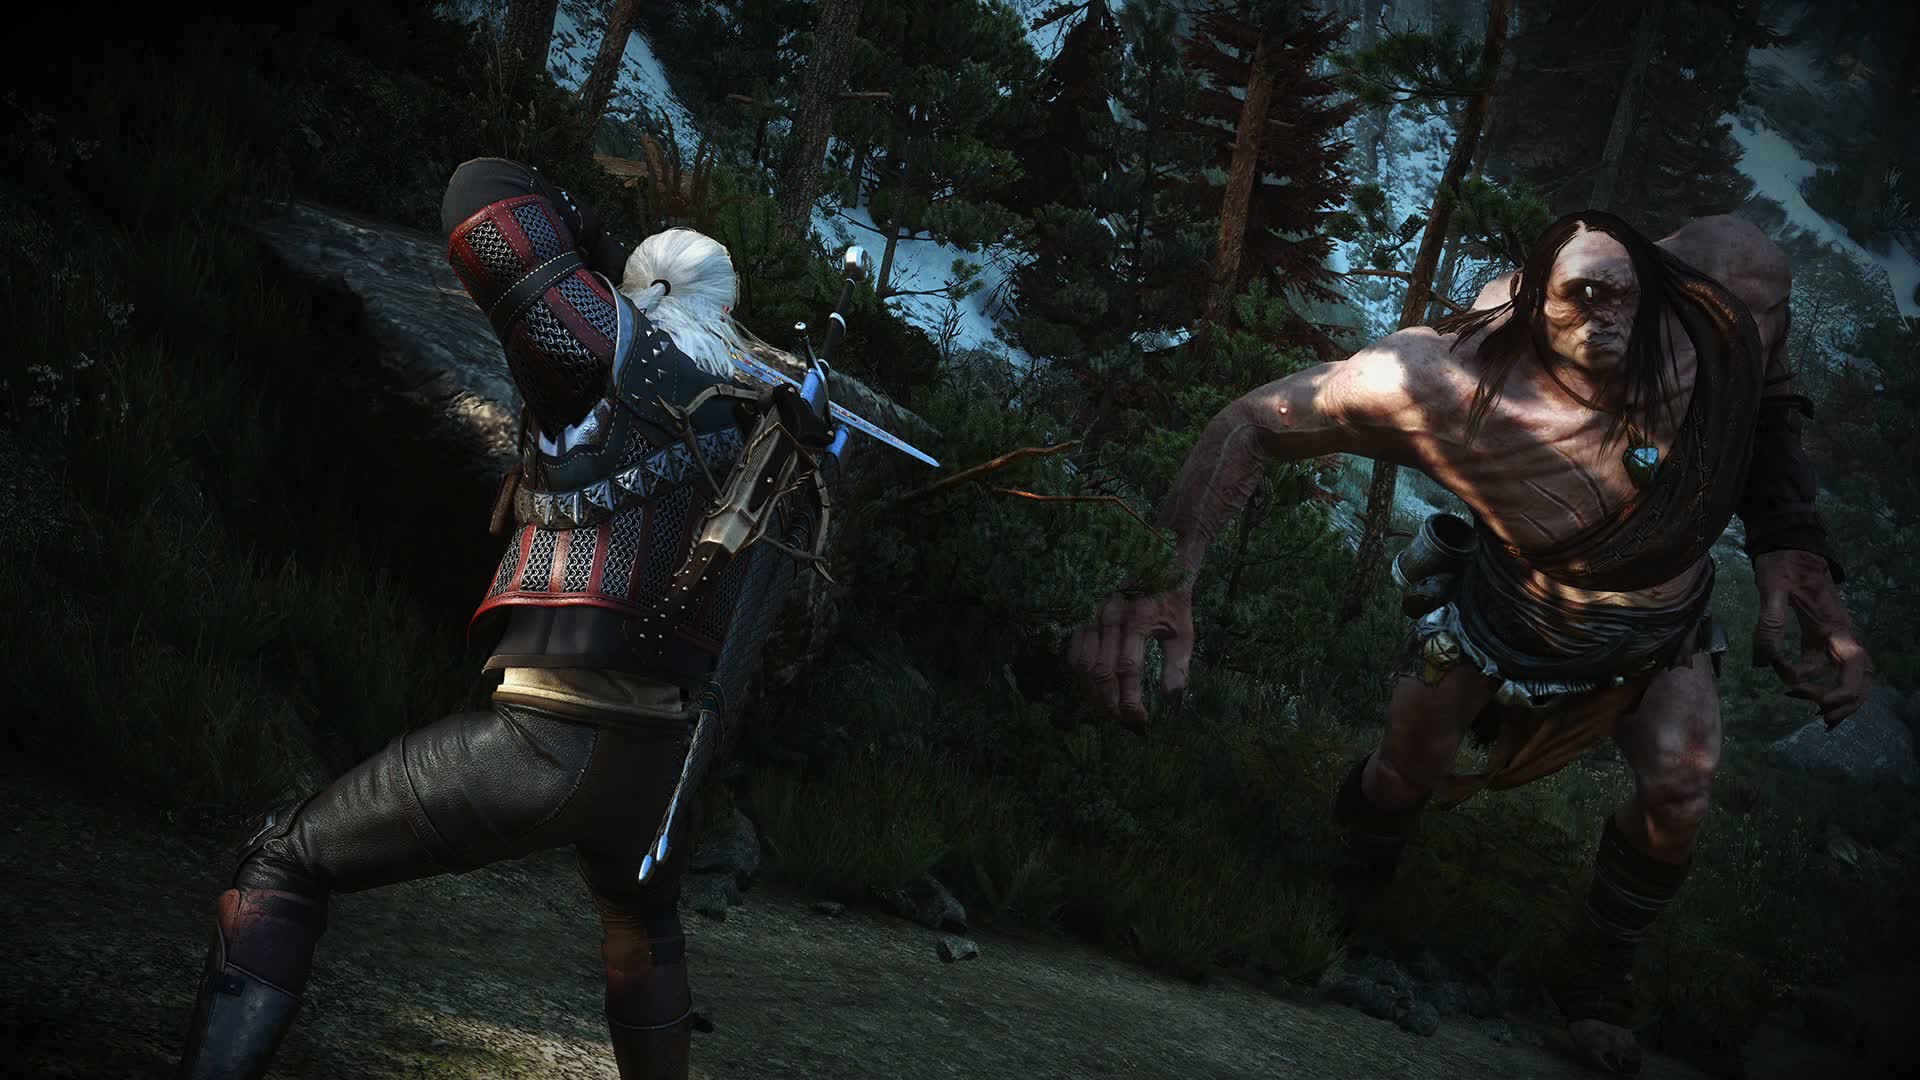 The Witcher 3 is getting a remaster for next-gen platforms, current owners get it for free